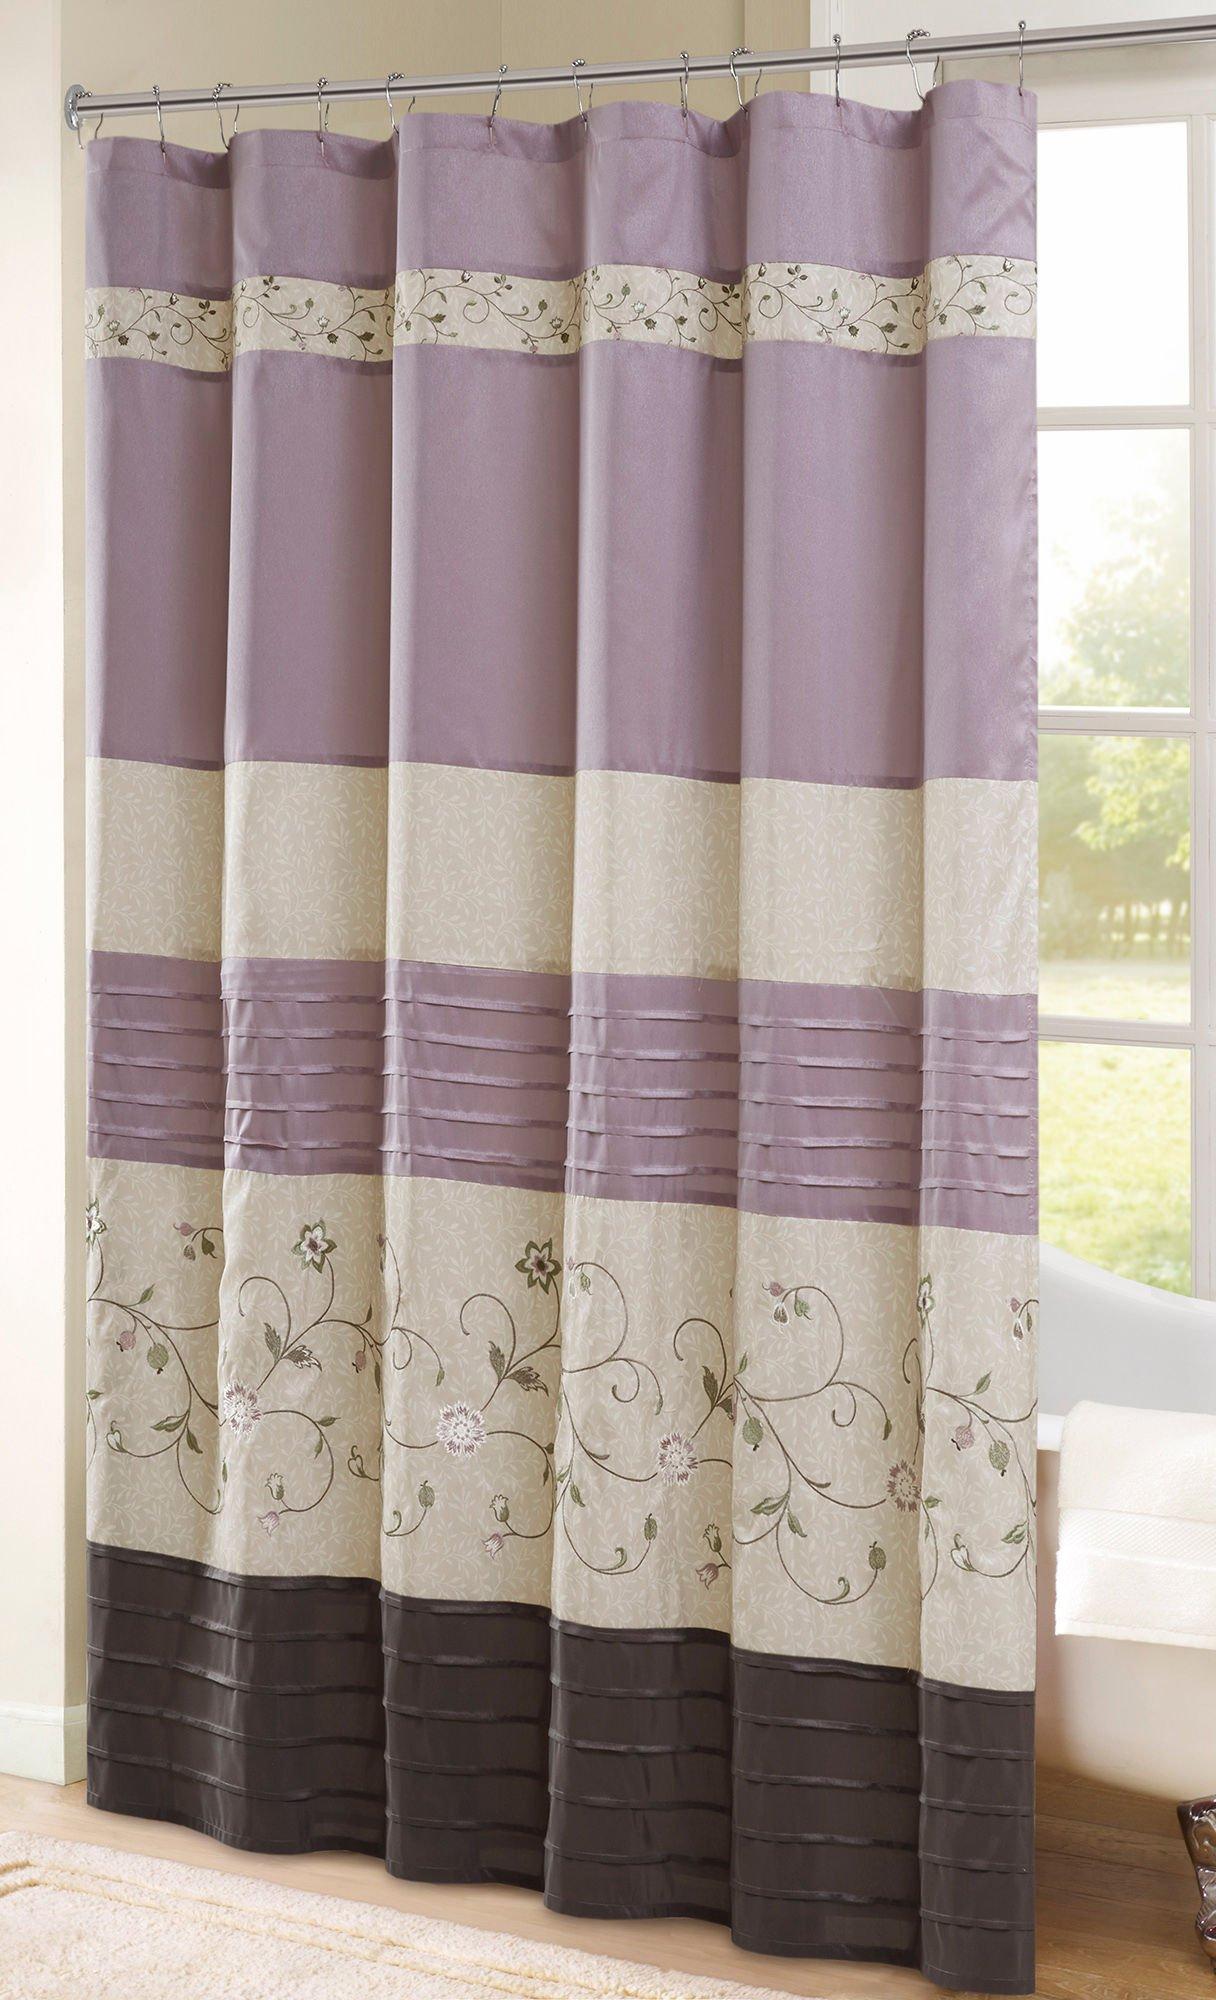 Photos - Other sanitary accessories Madison Park Serene Shower Curtain